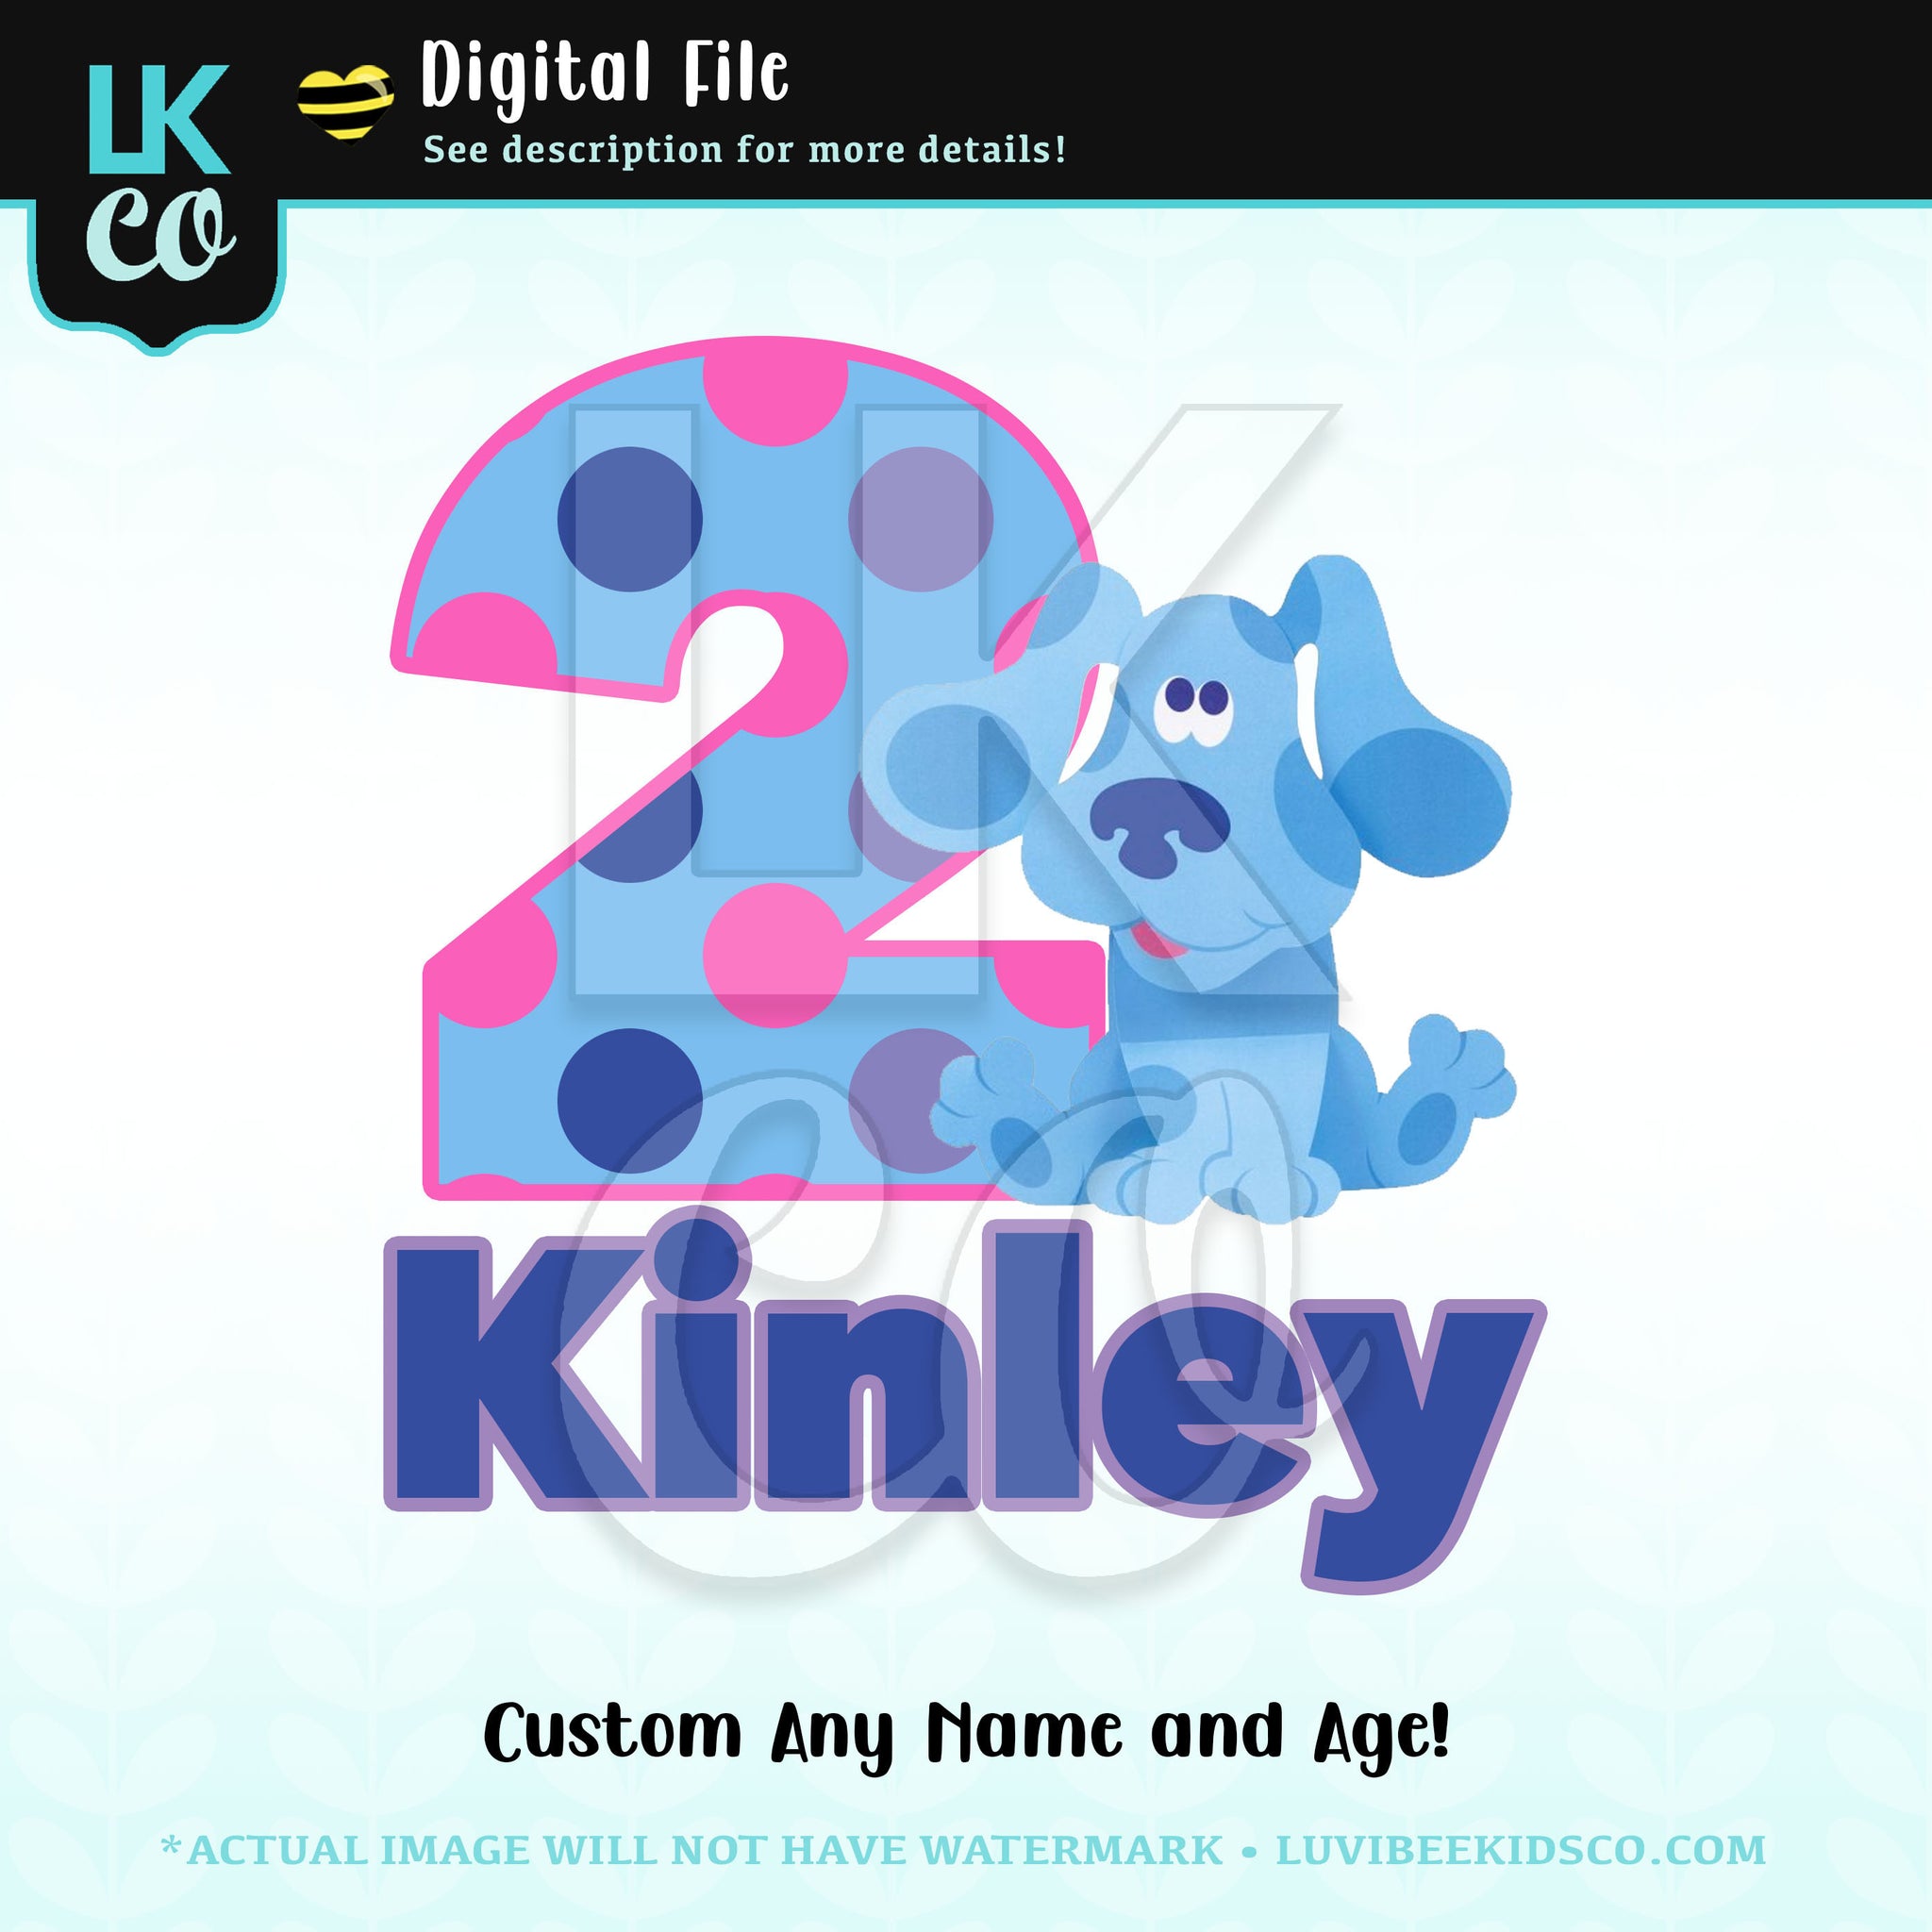 Blues Clues Digital File [12-24hr email] for Birthdays and Events - Any Name and Age